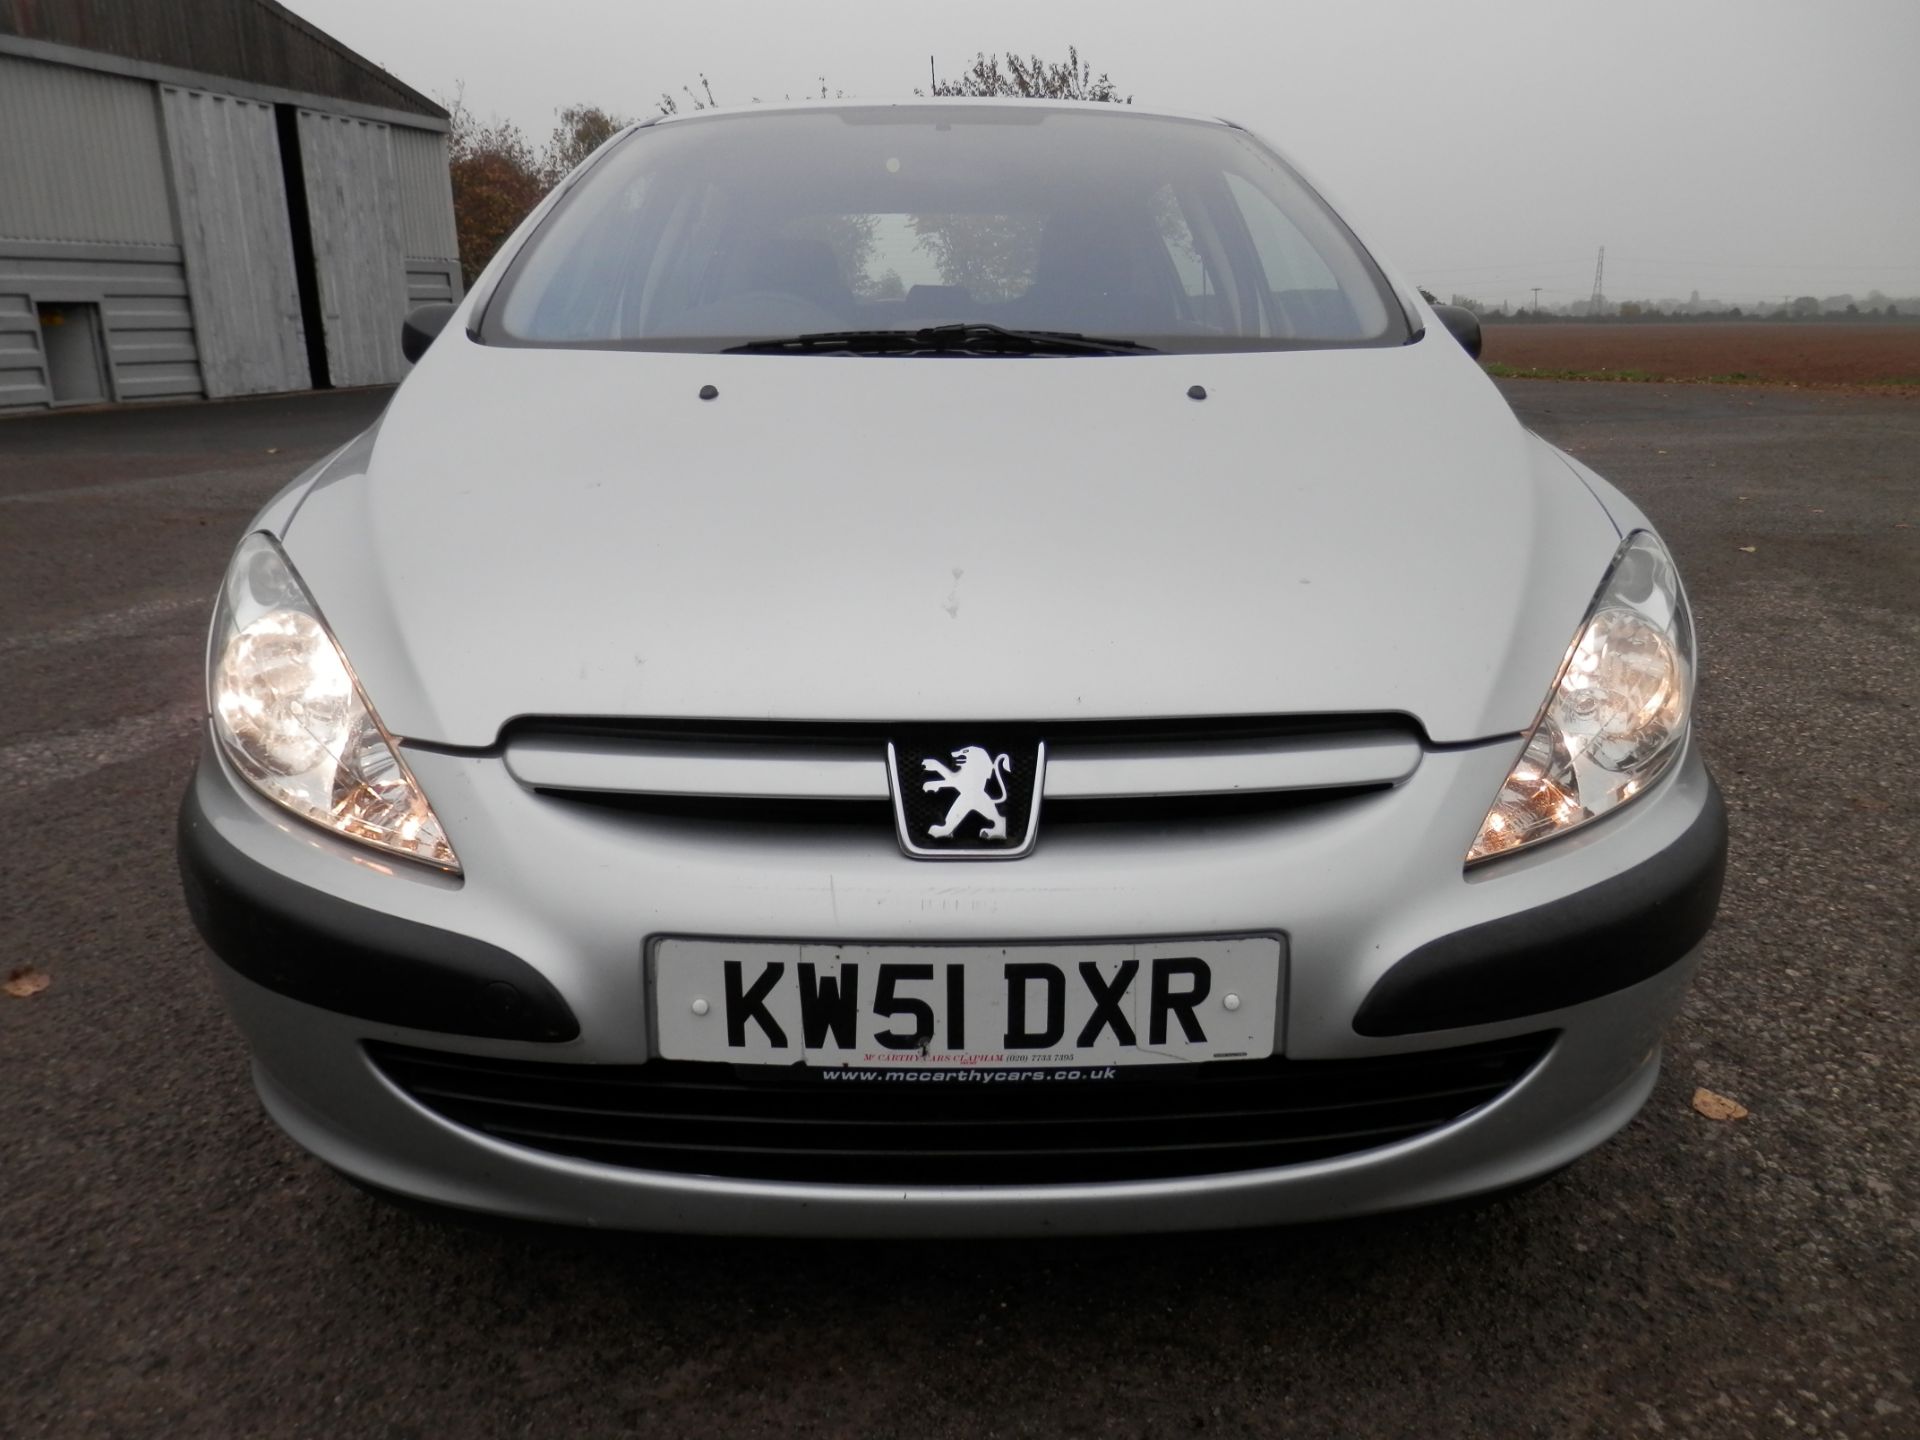 2002/51 PLATE PEUGEOT 307 1.6 LX AUTOMATIC, ONLY 51K WARRANTED MILES & MOT MAY 2017, GREAT CAR. - Image 2 of 22